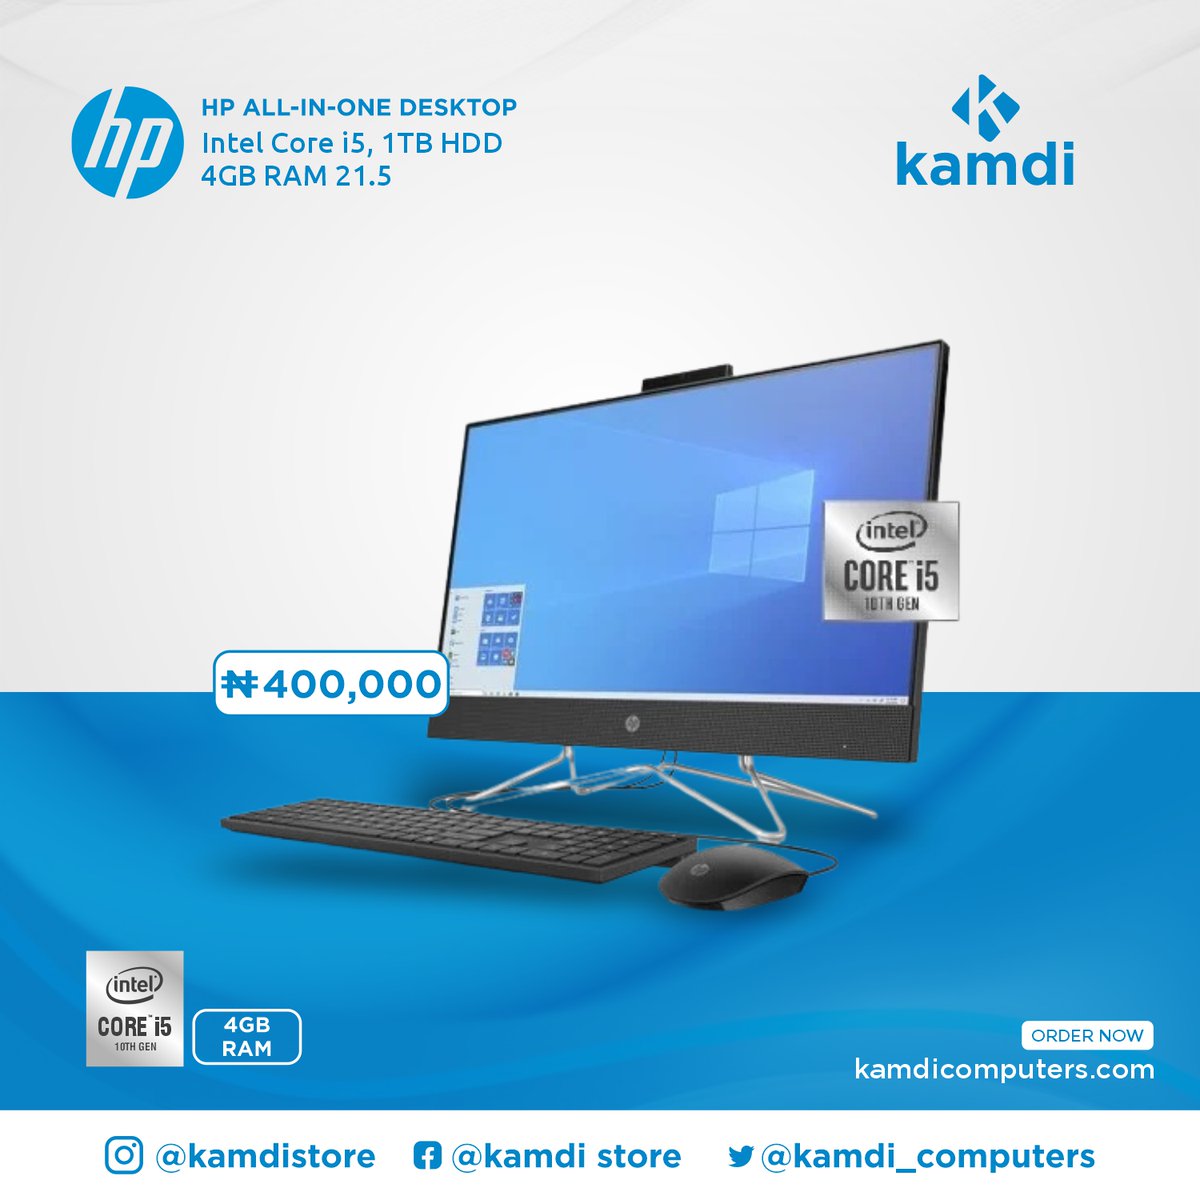 Brand New HP All-In-One Desktop Intel Core i5 1TB HDD, 4GB RAM 21.5 Ich available in our store

We deliver nationwide via DHL/GIG.

Kamdi Computers Limited: No 7 Maputo Street Wuse Zone 3
Call: 08169357253
WhatsApp: 09137366297

#kamdistore
#kamdi
#Allinone
#Abuja